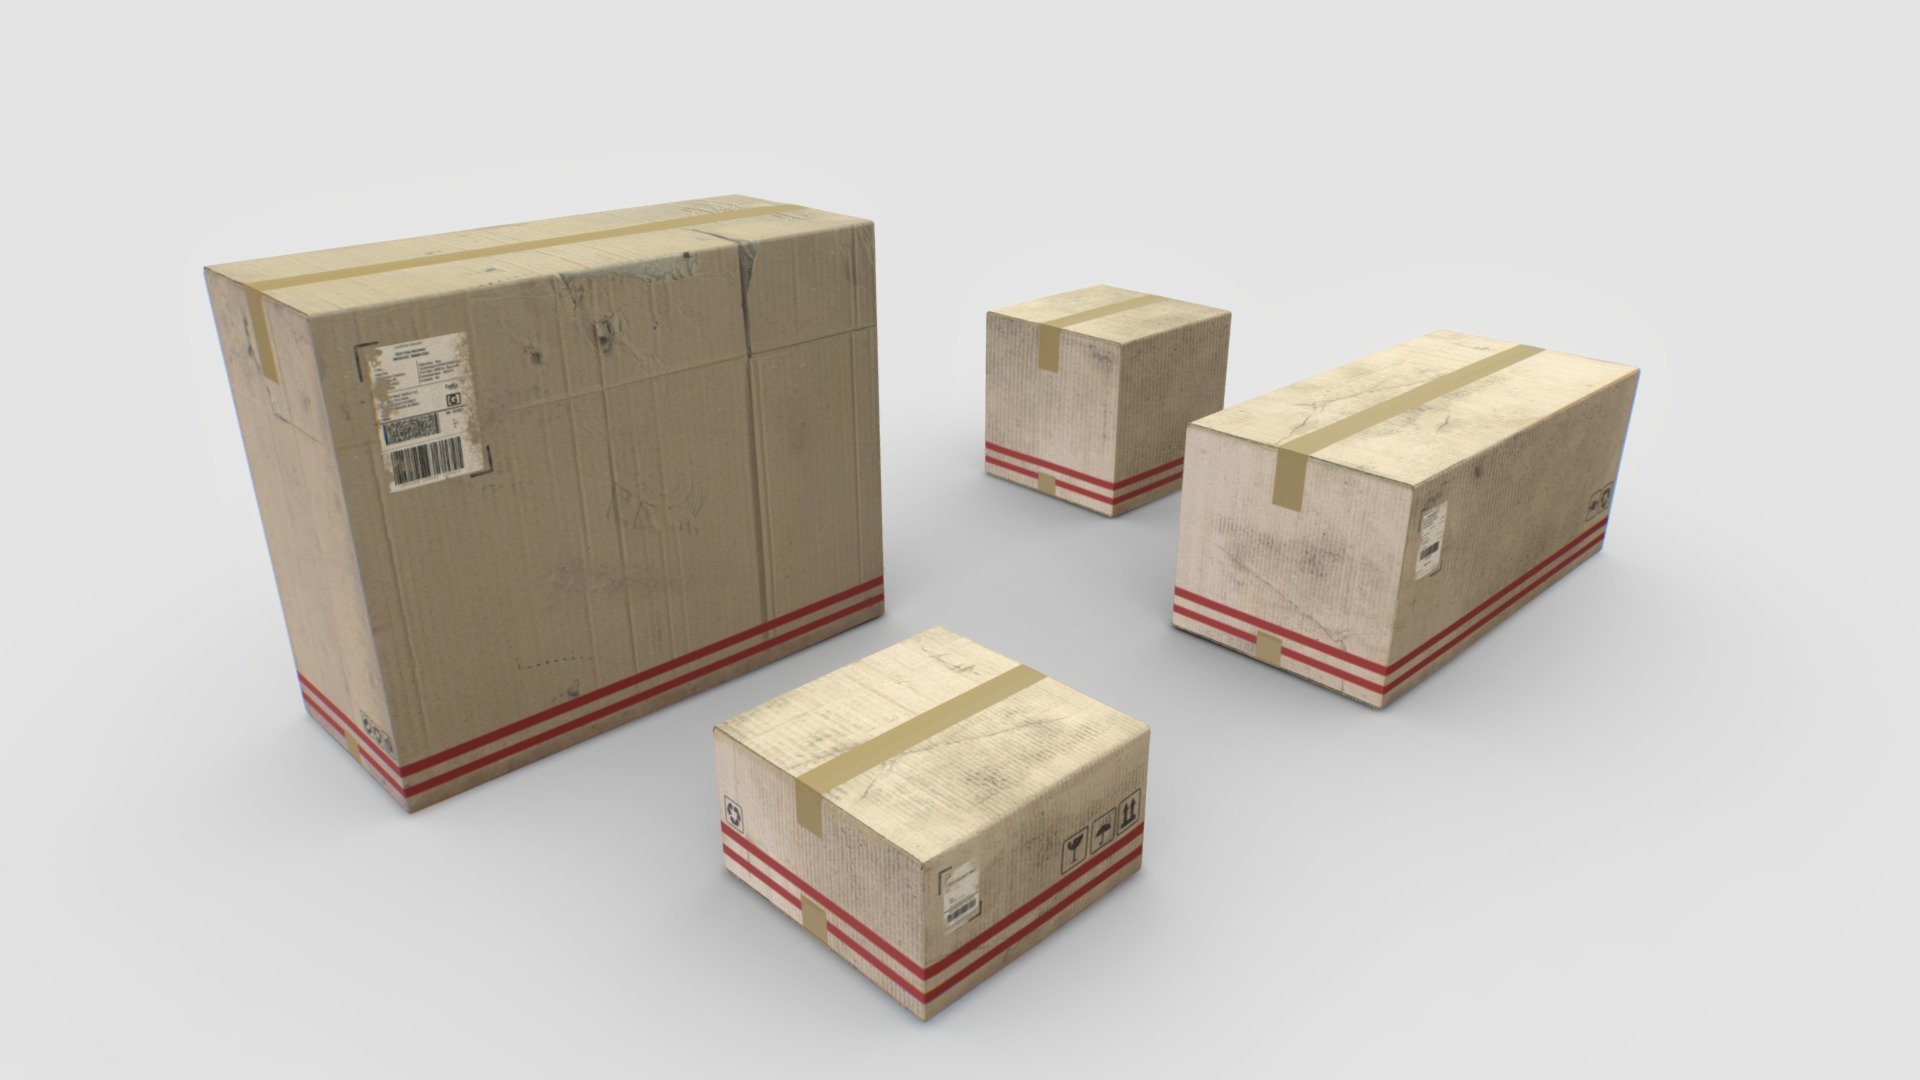 4 Cardboard boxes based in real ones. Realistic scale.

Comes with 1 set of PBR 4096p textures including Albedo, Normal, Roughness, Metalness and AO.

Suitable for factories, hangars, warehouses, construction sites, trucks, etc..

Realistic scale. Total verts 1300, polys 2300 3d model